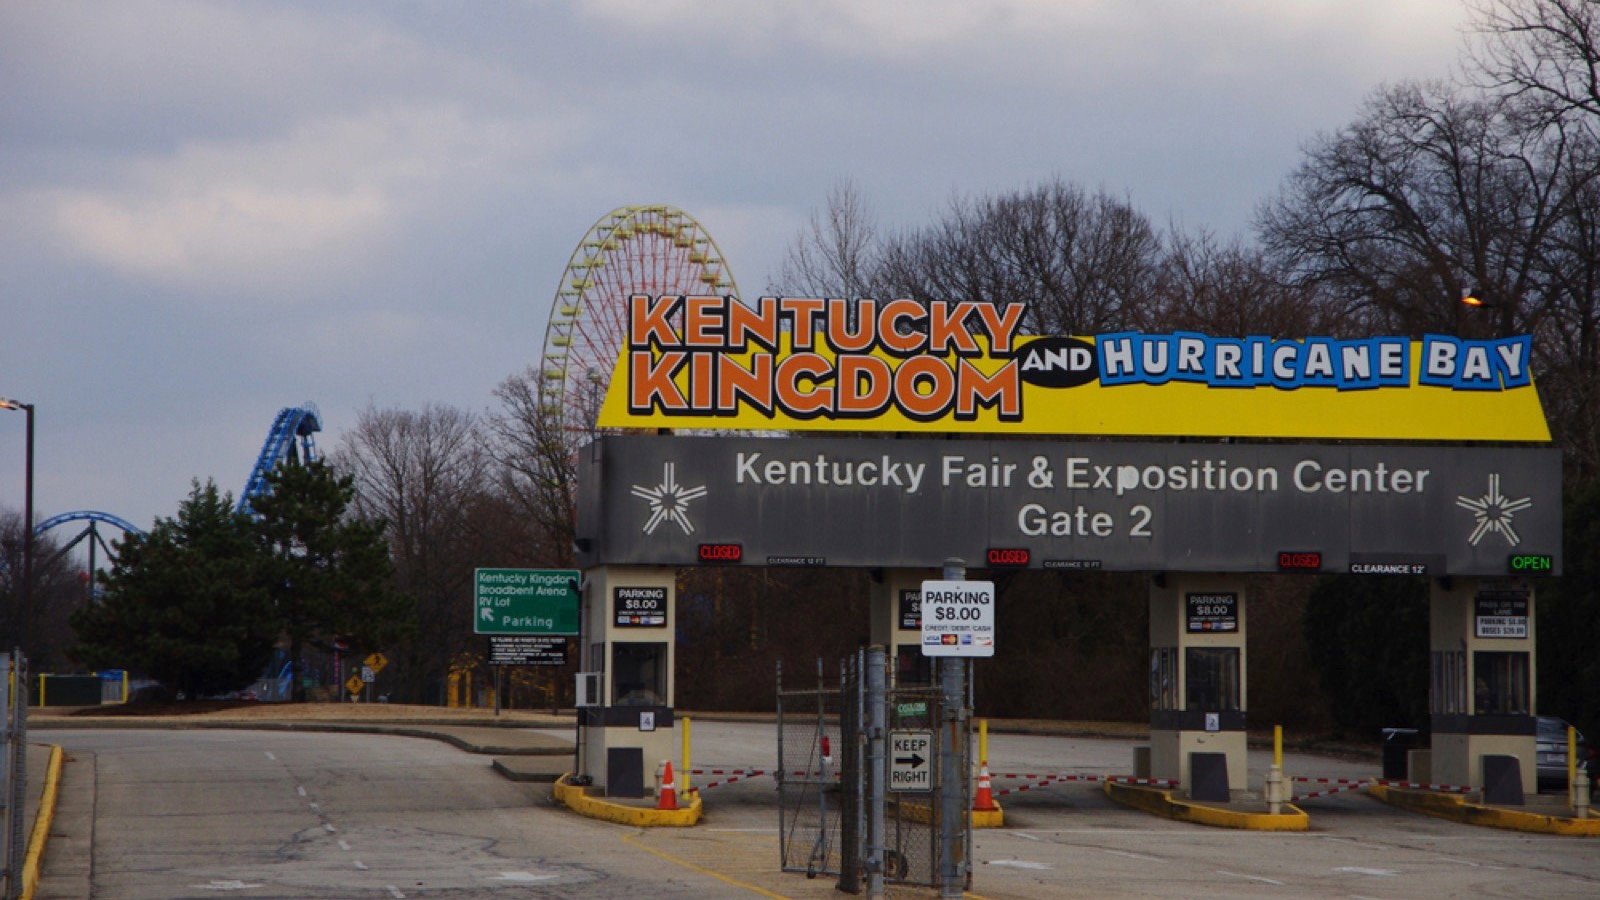 <p>The Kentucky Kingdom Theme and Water Park promises hours of family fun in this adventure-packed amusement park in Louisville. It is a two-in-one experience with an amusement park and a water park.</p><p>The Kentucky Kingdom has a world-class rollercoaster and dozens of kid-friendly, less scary rides, including a mini roller coaster. Hurricane Bay Water Park has over 70 family-friendly attractions, including pint-sized rides, sparkling wave pools, exciting water slides, and wave pools.</p>